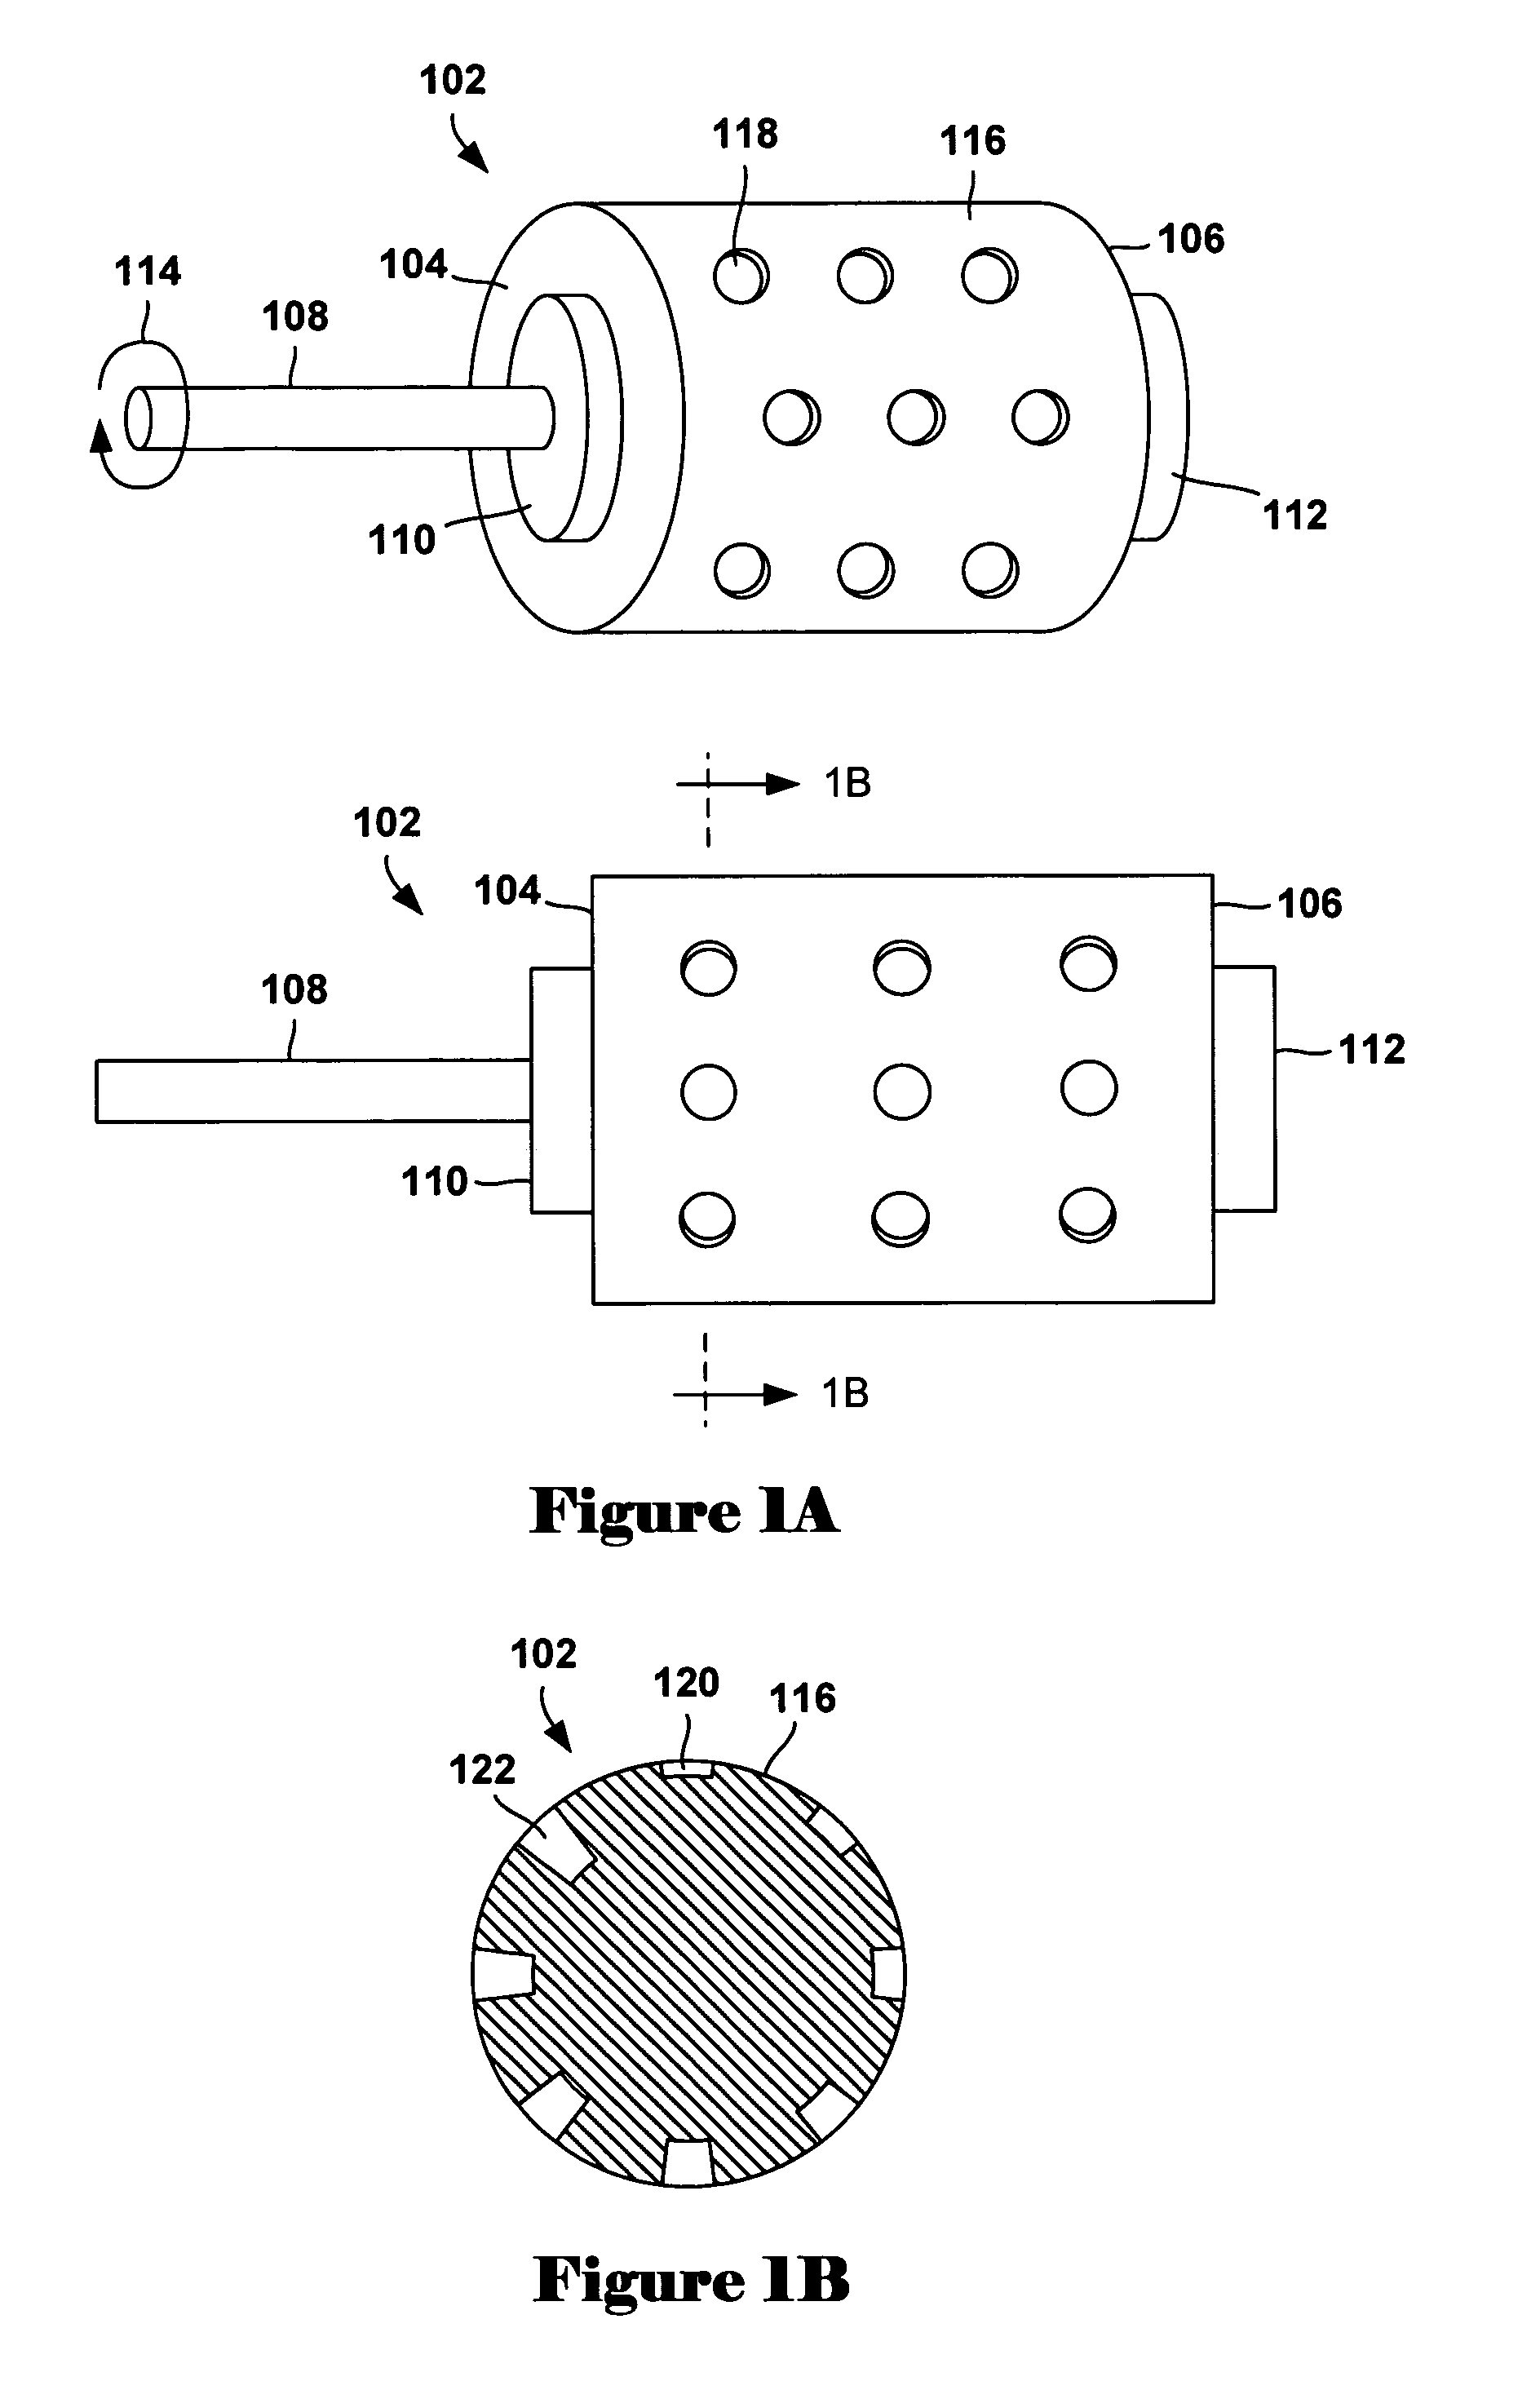 System and method for treating fuel to increase fuel efficiency in internal combustion engines